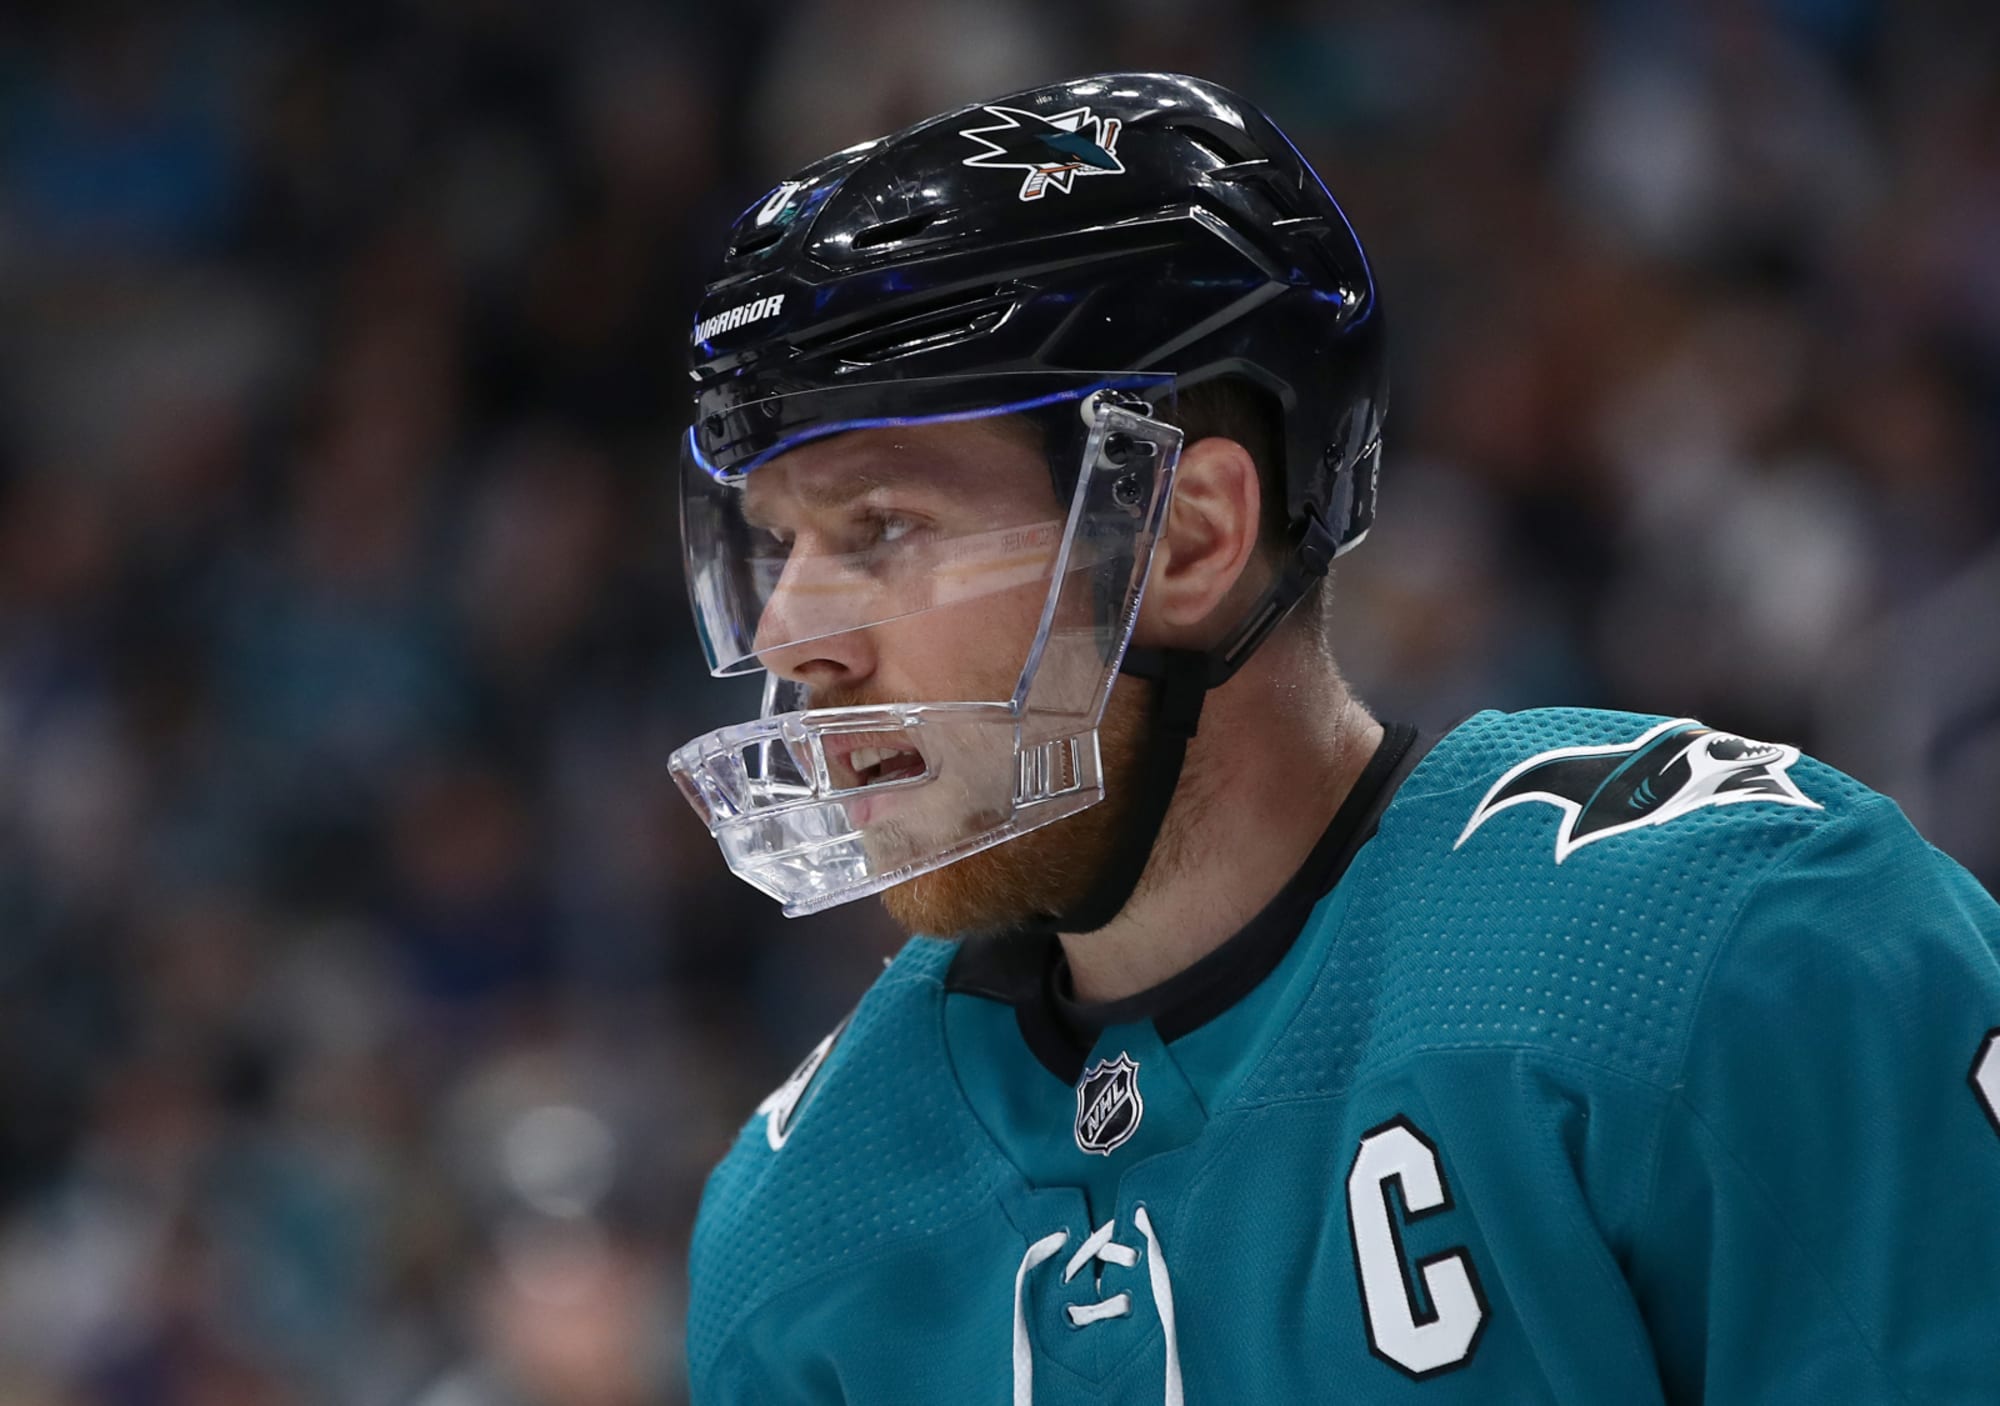 Pavelski likely to be named next Sharks captain